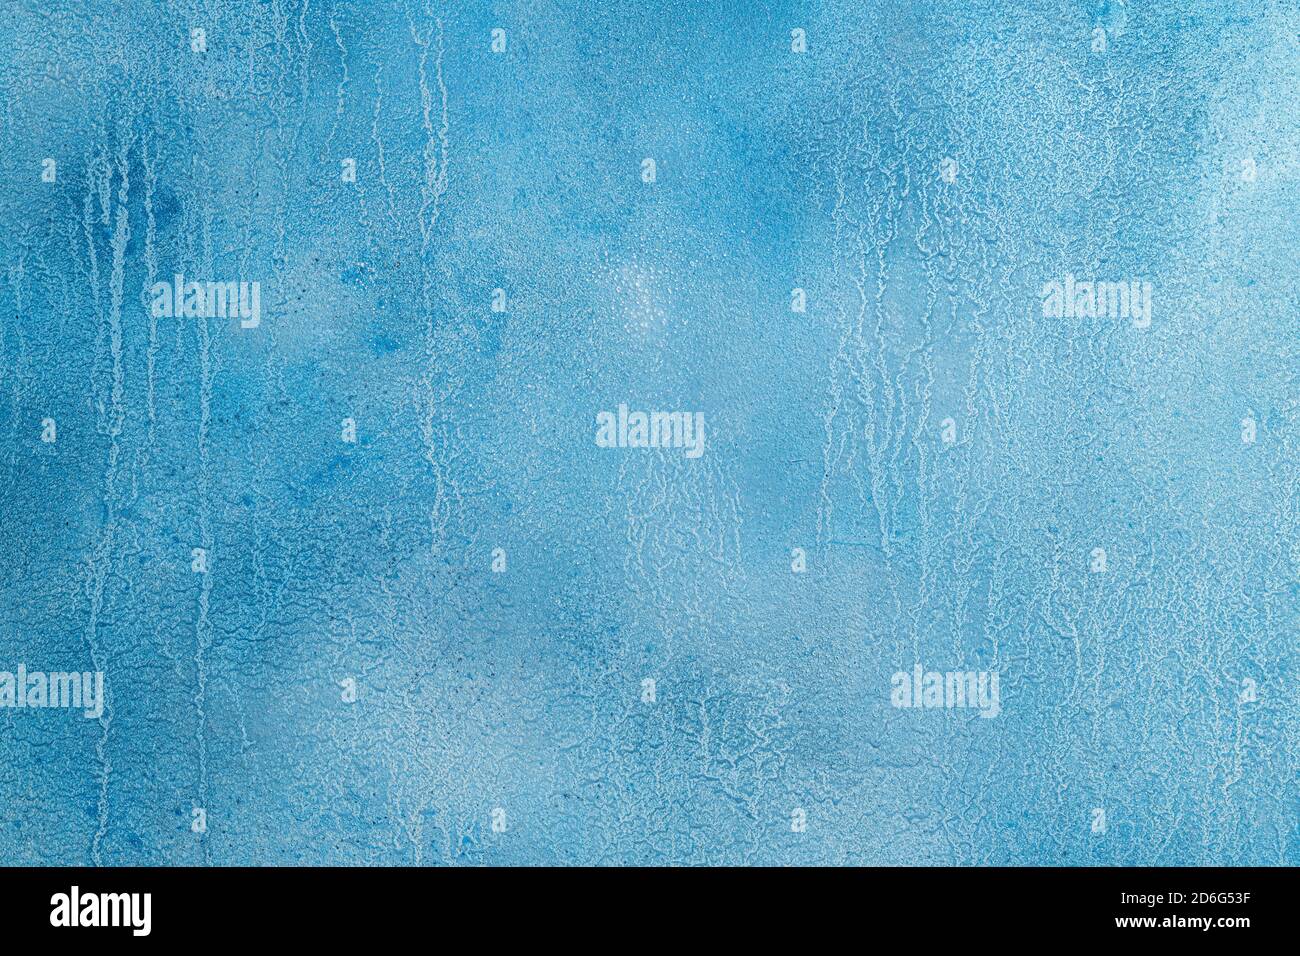 Background blue grunge. Beautiful abstract grunge decorative navy blue dark stucco background. Pattern texture cement blue dark banner with copy space Stock Photo